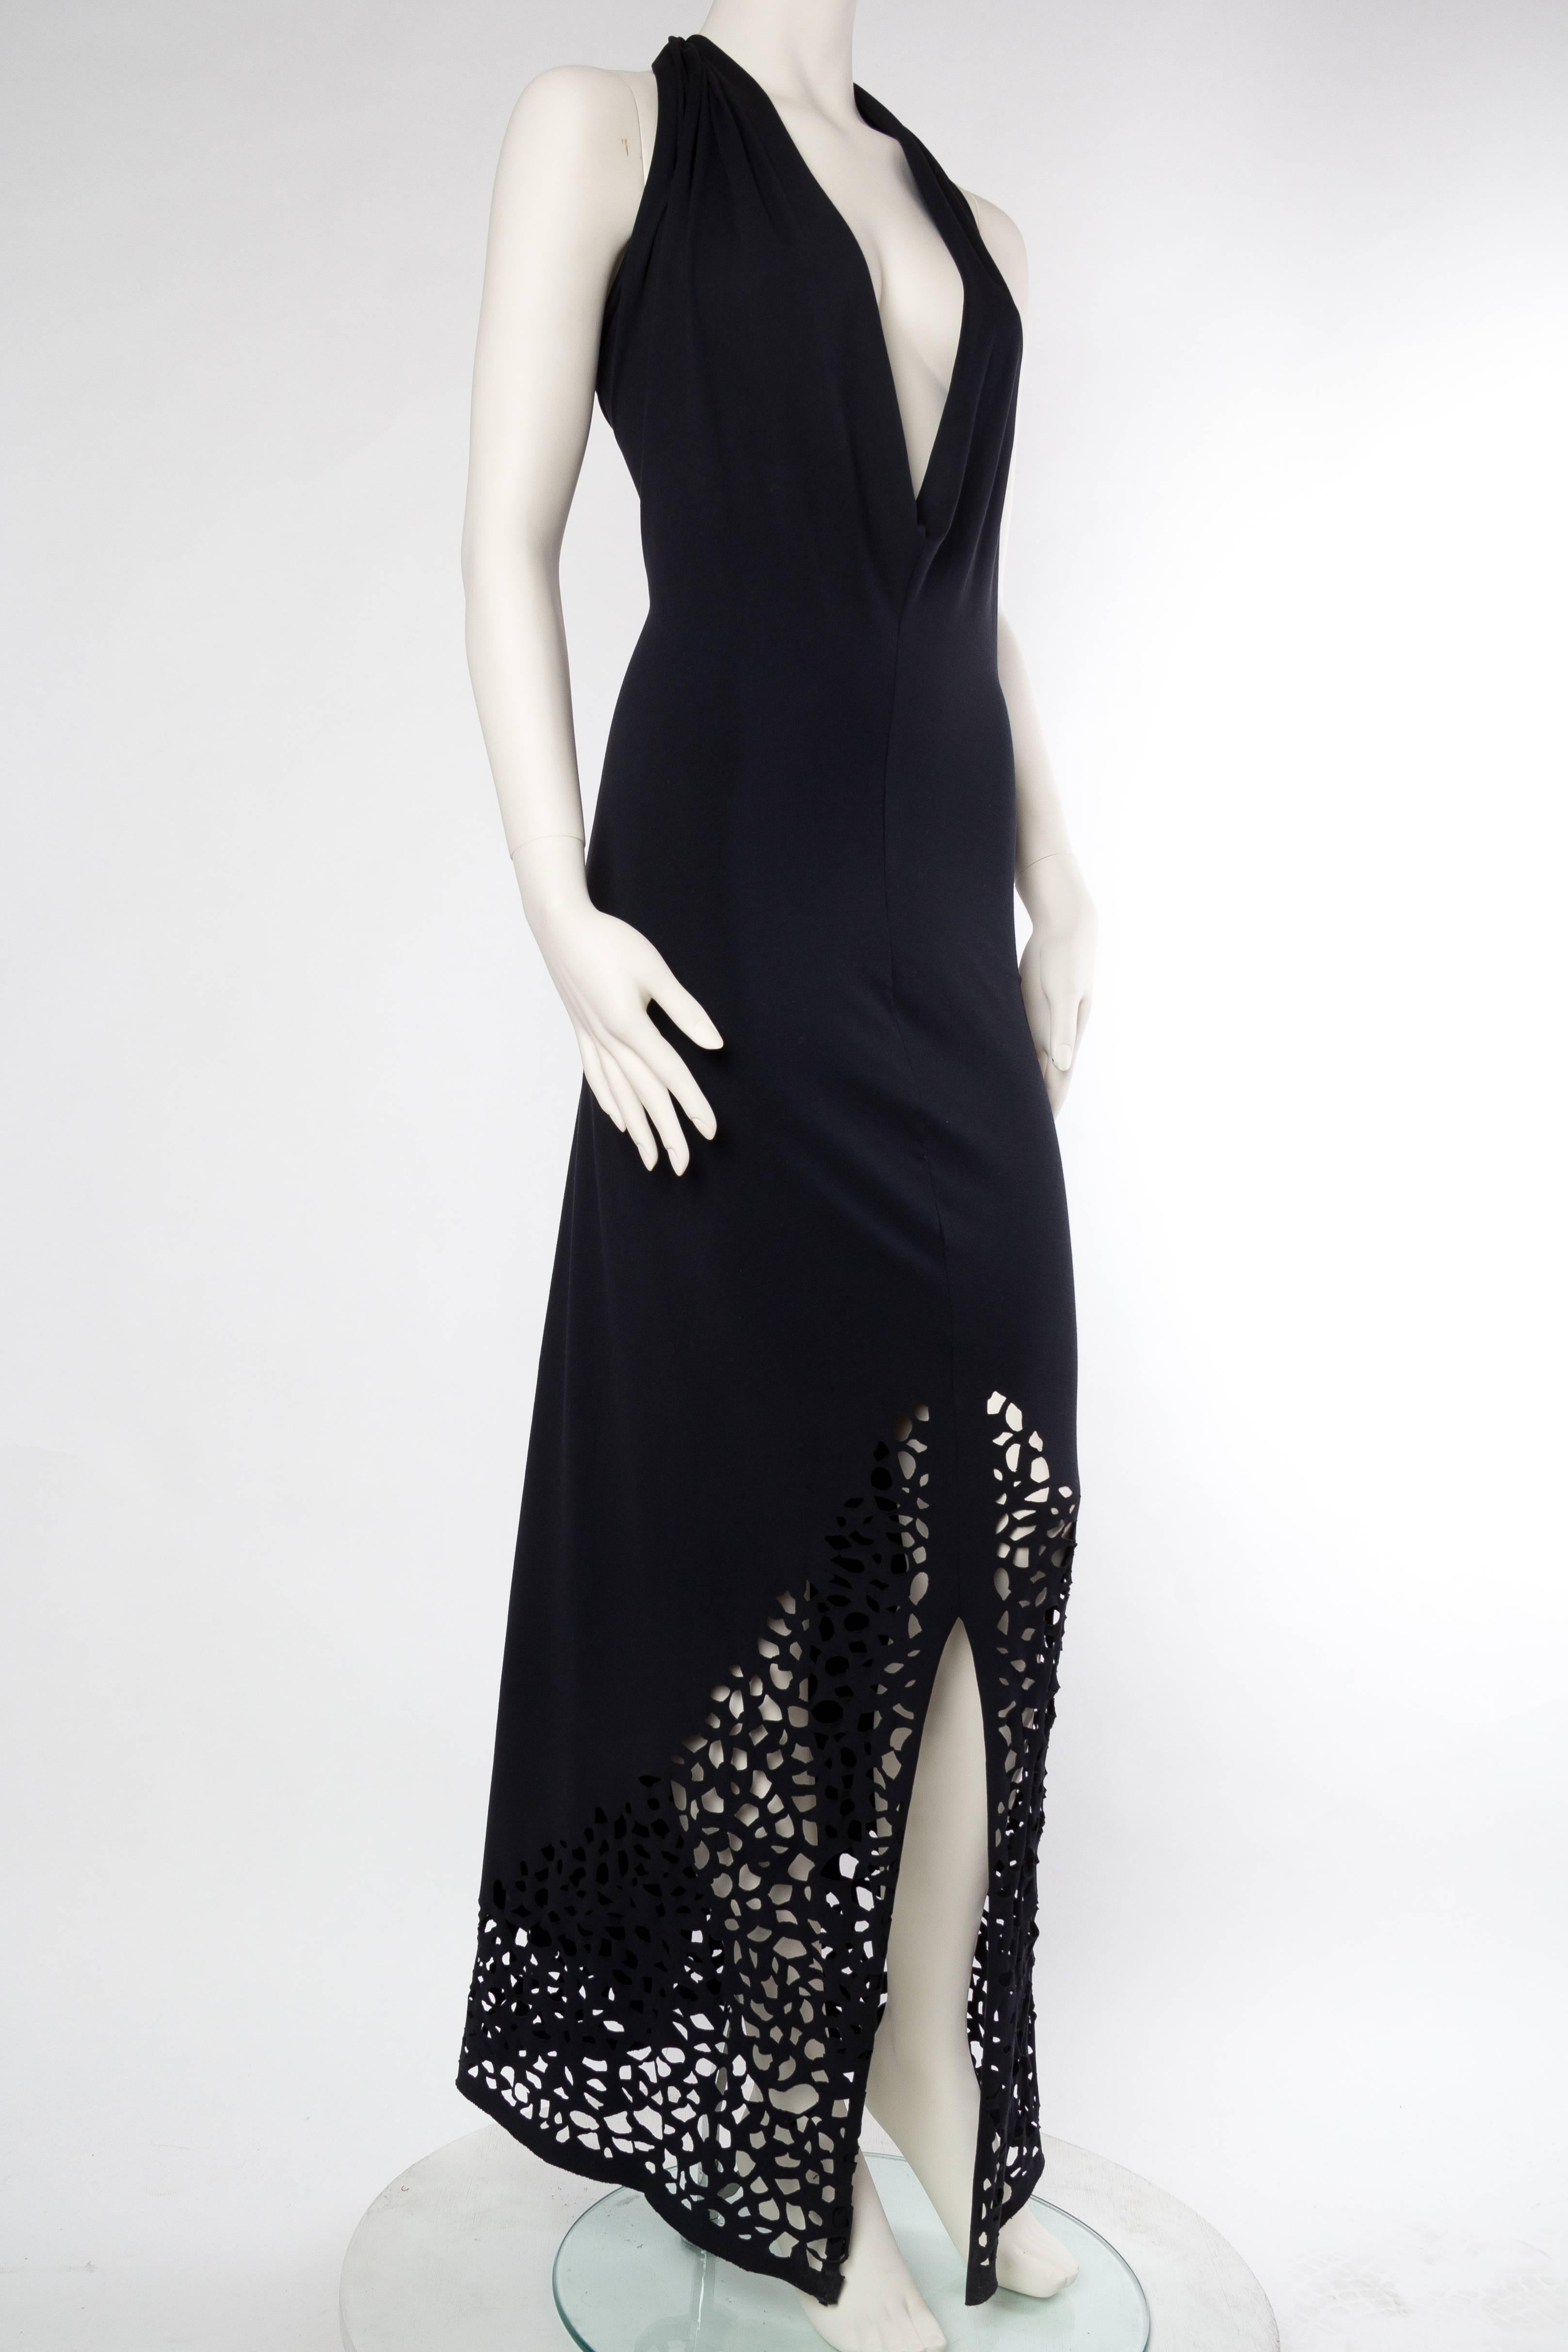 Black Plunging Backless Slinky Jersey Gown By Karl Lagerfeld